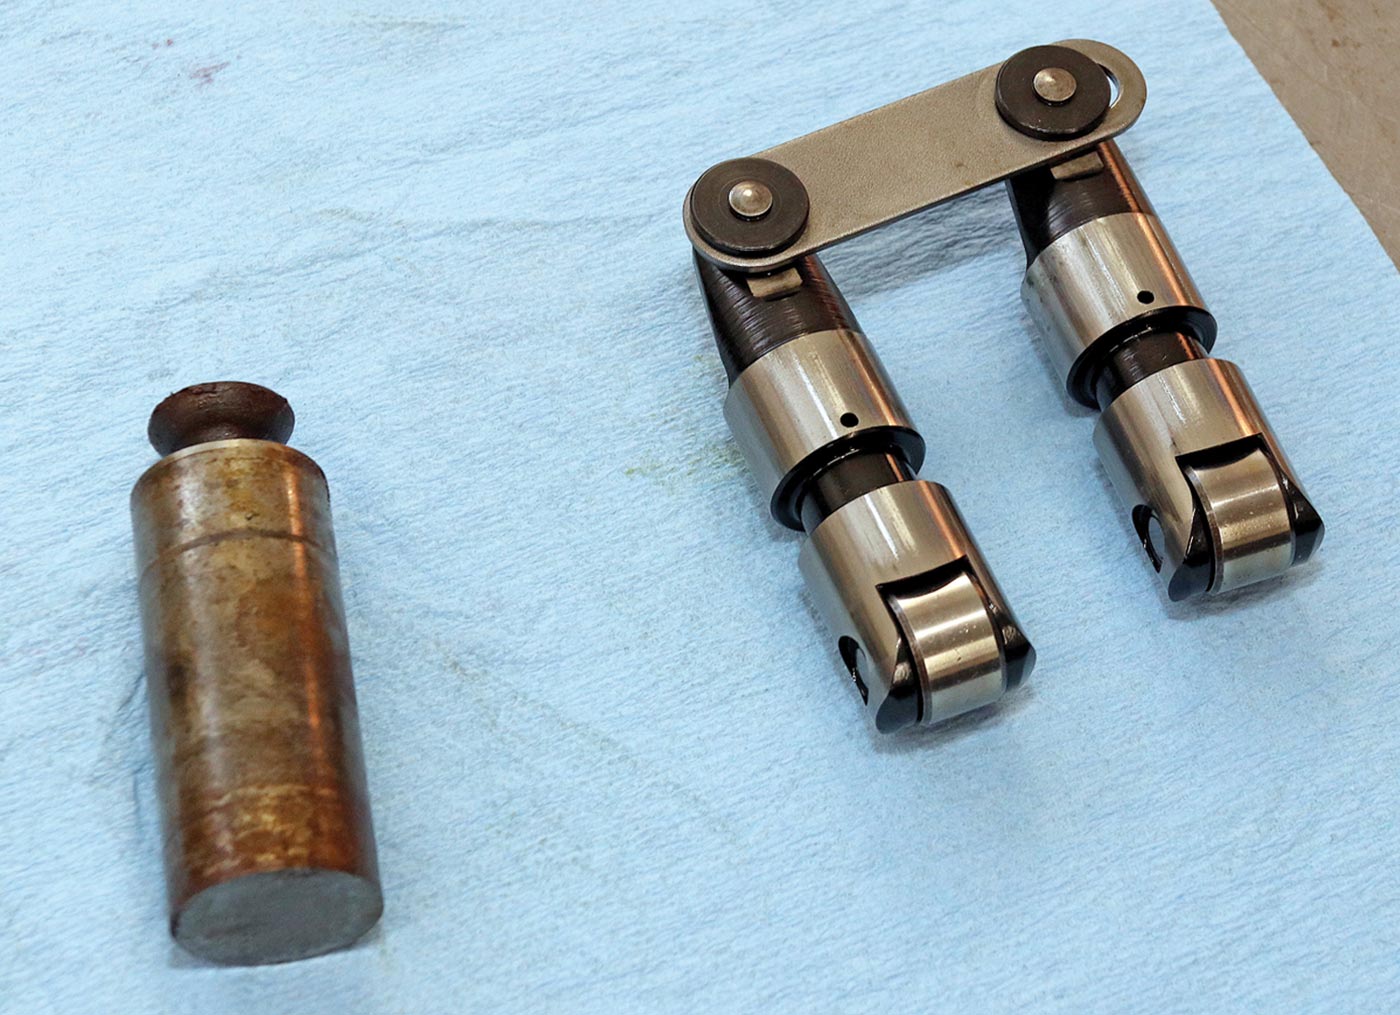 the stock solid flat-tappet lifter for this engine (left);  a pair of modern tie-bar roller lifters that Dorton managed to get to work (right)